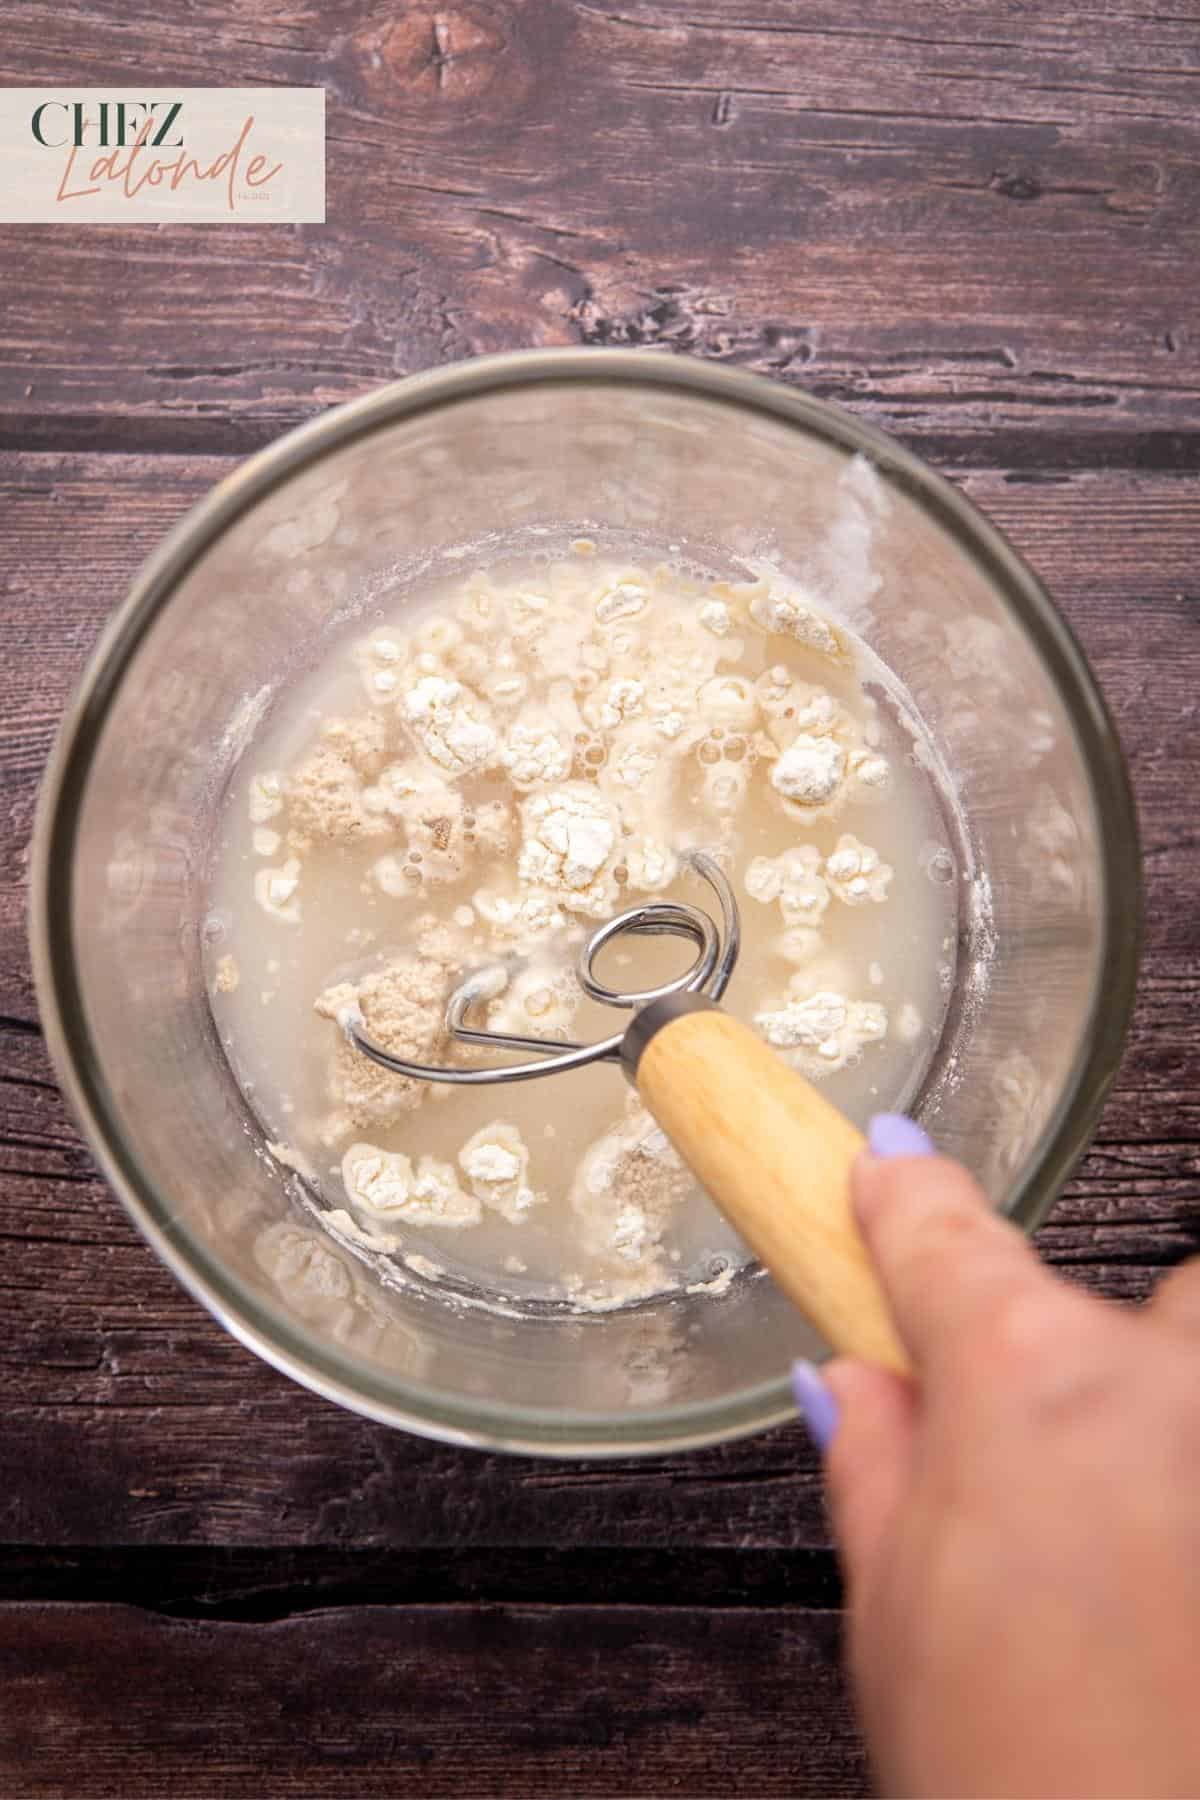 In a fresh bowl, combine 1 cup of lukewarm water (95 to 110F), 2 ¼ teaspoons of active dry yeast (or a packet), 2 tablespoons of sugar, and 2 tablespoons of all-purpose flour.